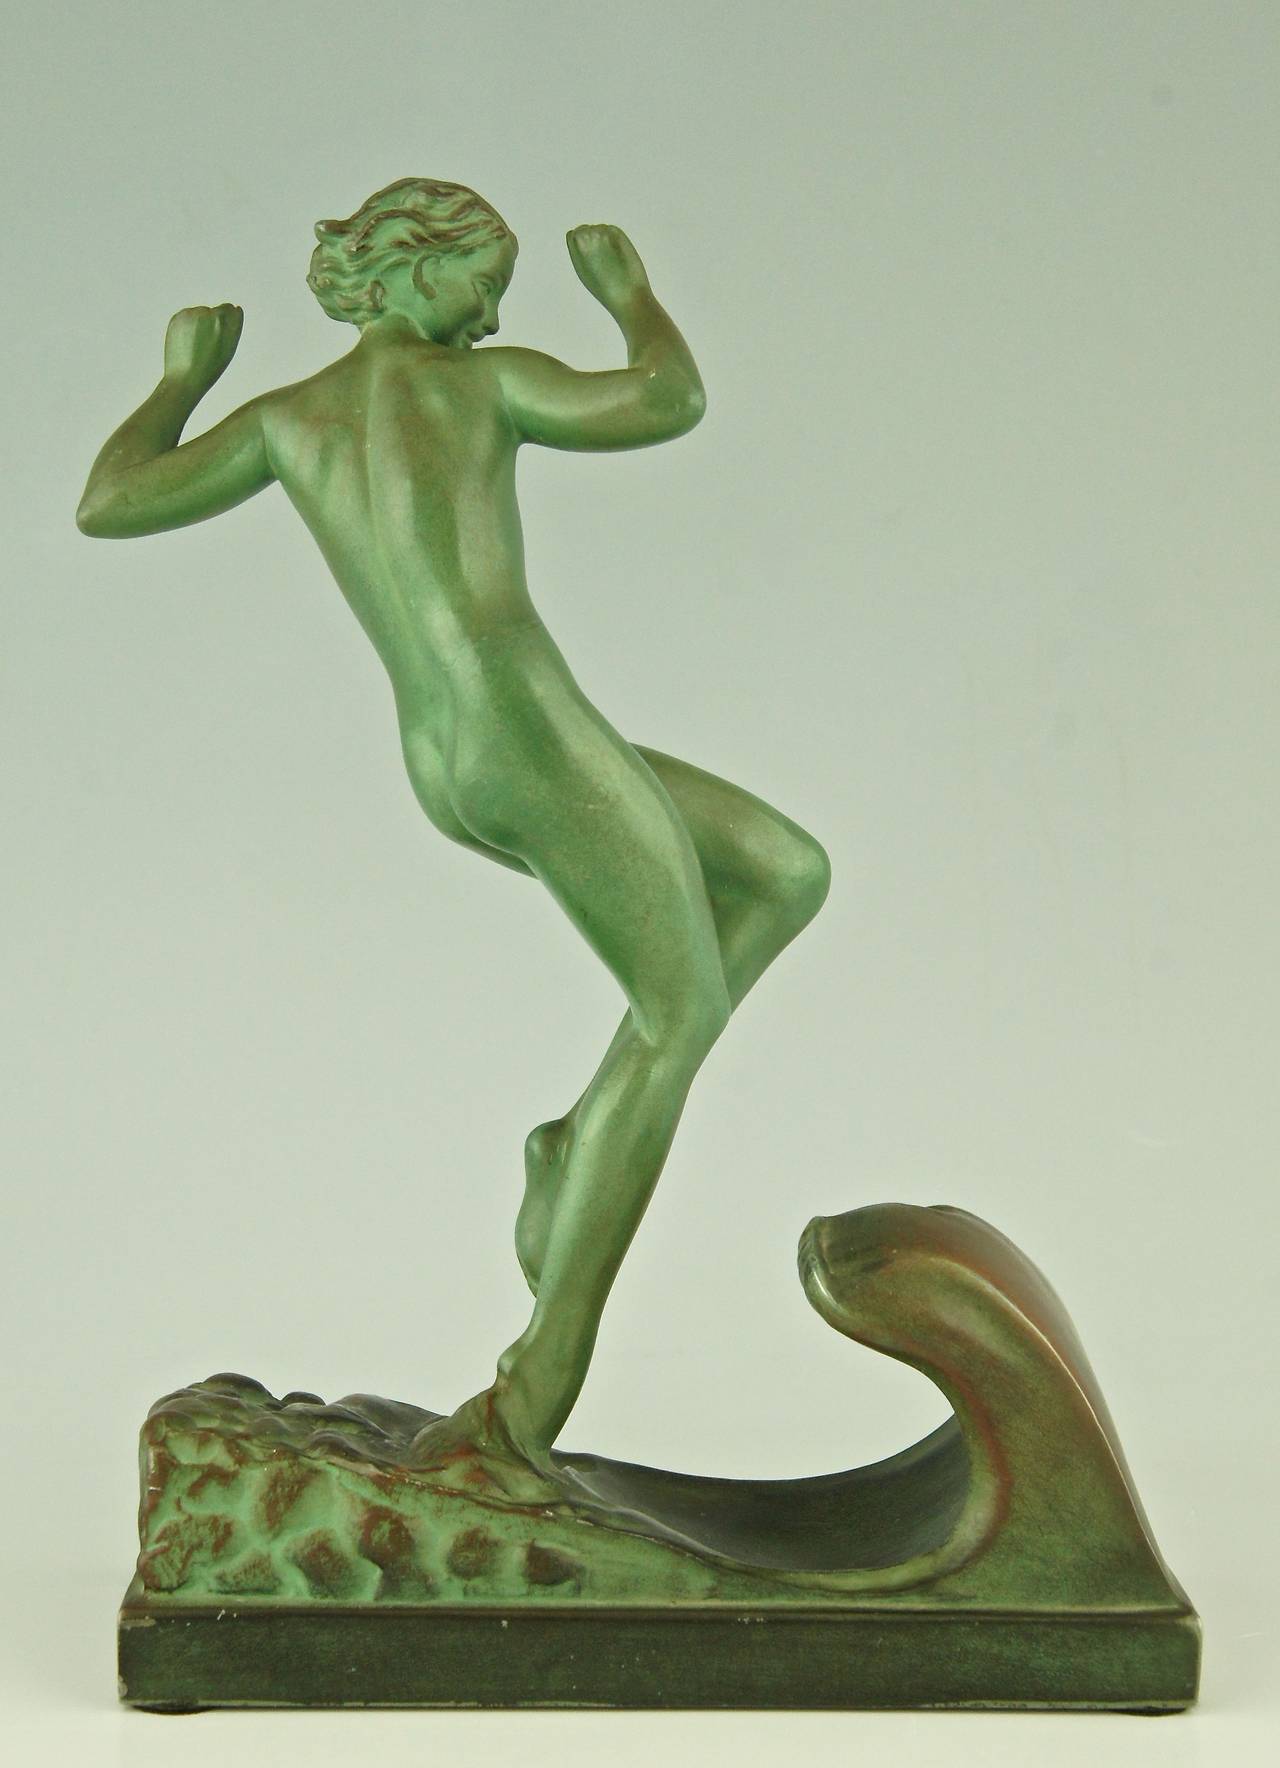 20th Century Art Deco Sculpture of a Nude in the Waves by Guerbe, France, 1930